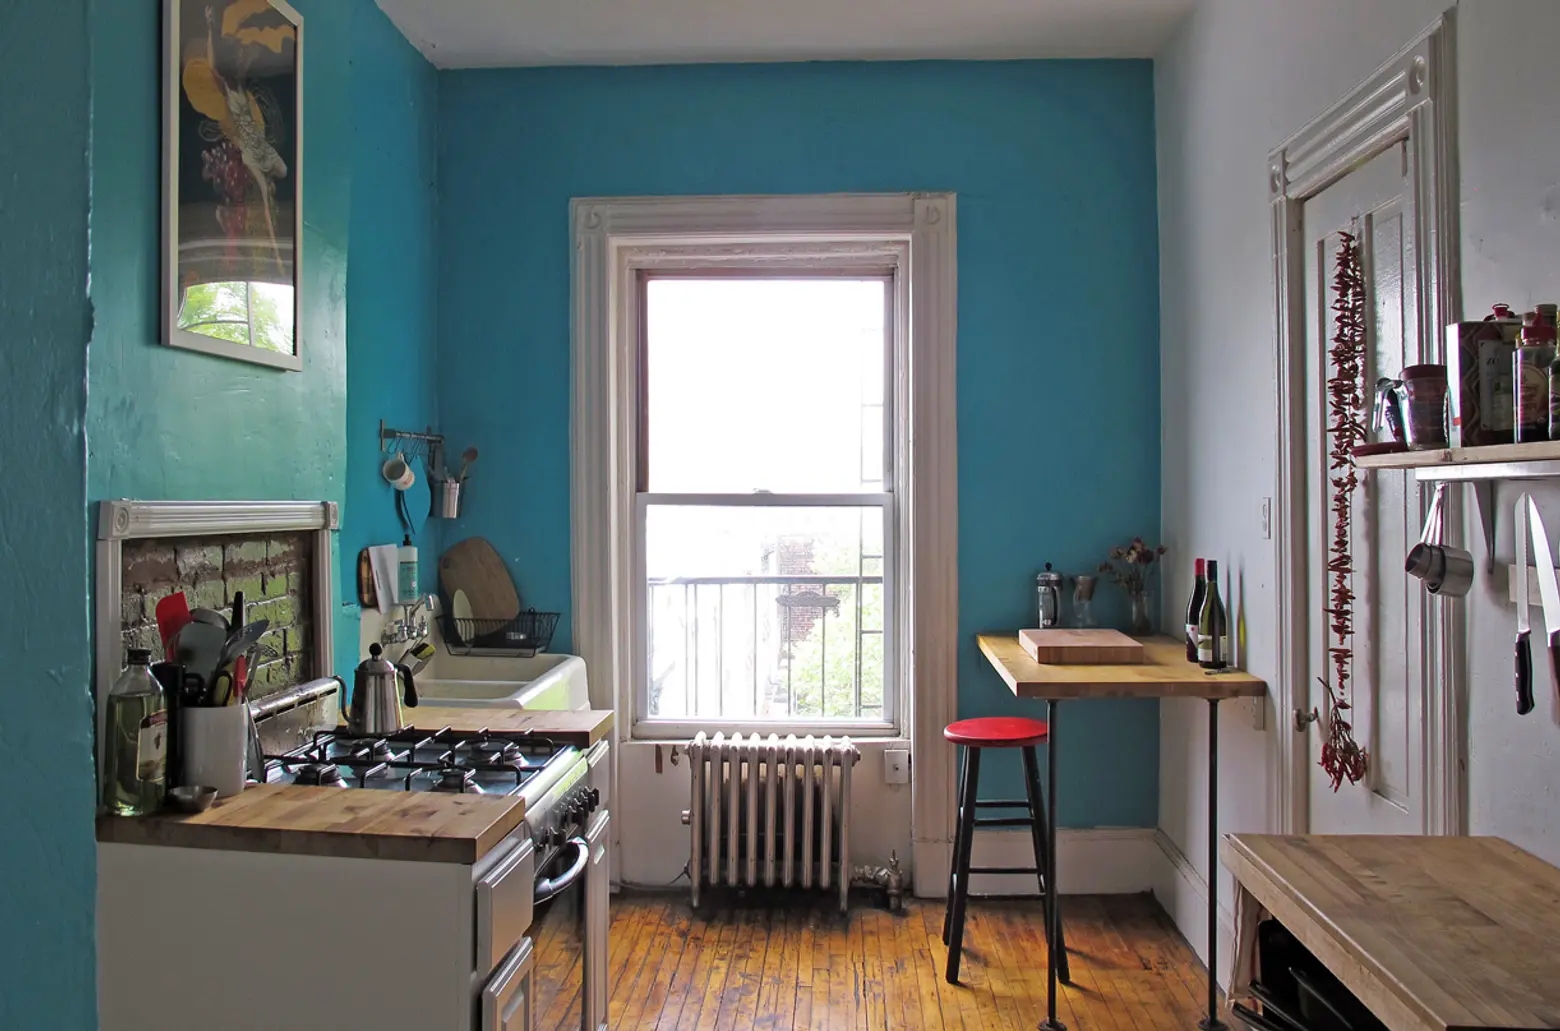 jonathan wing, new york roommate search, brooklyn apartments for rent, new your apartments for rent, brooklyn rooms for rent, new york rooms for rent, 159 willoughby avenue, fort greene apartments, row house fort greene